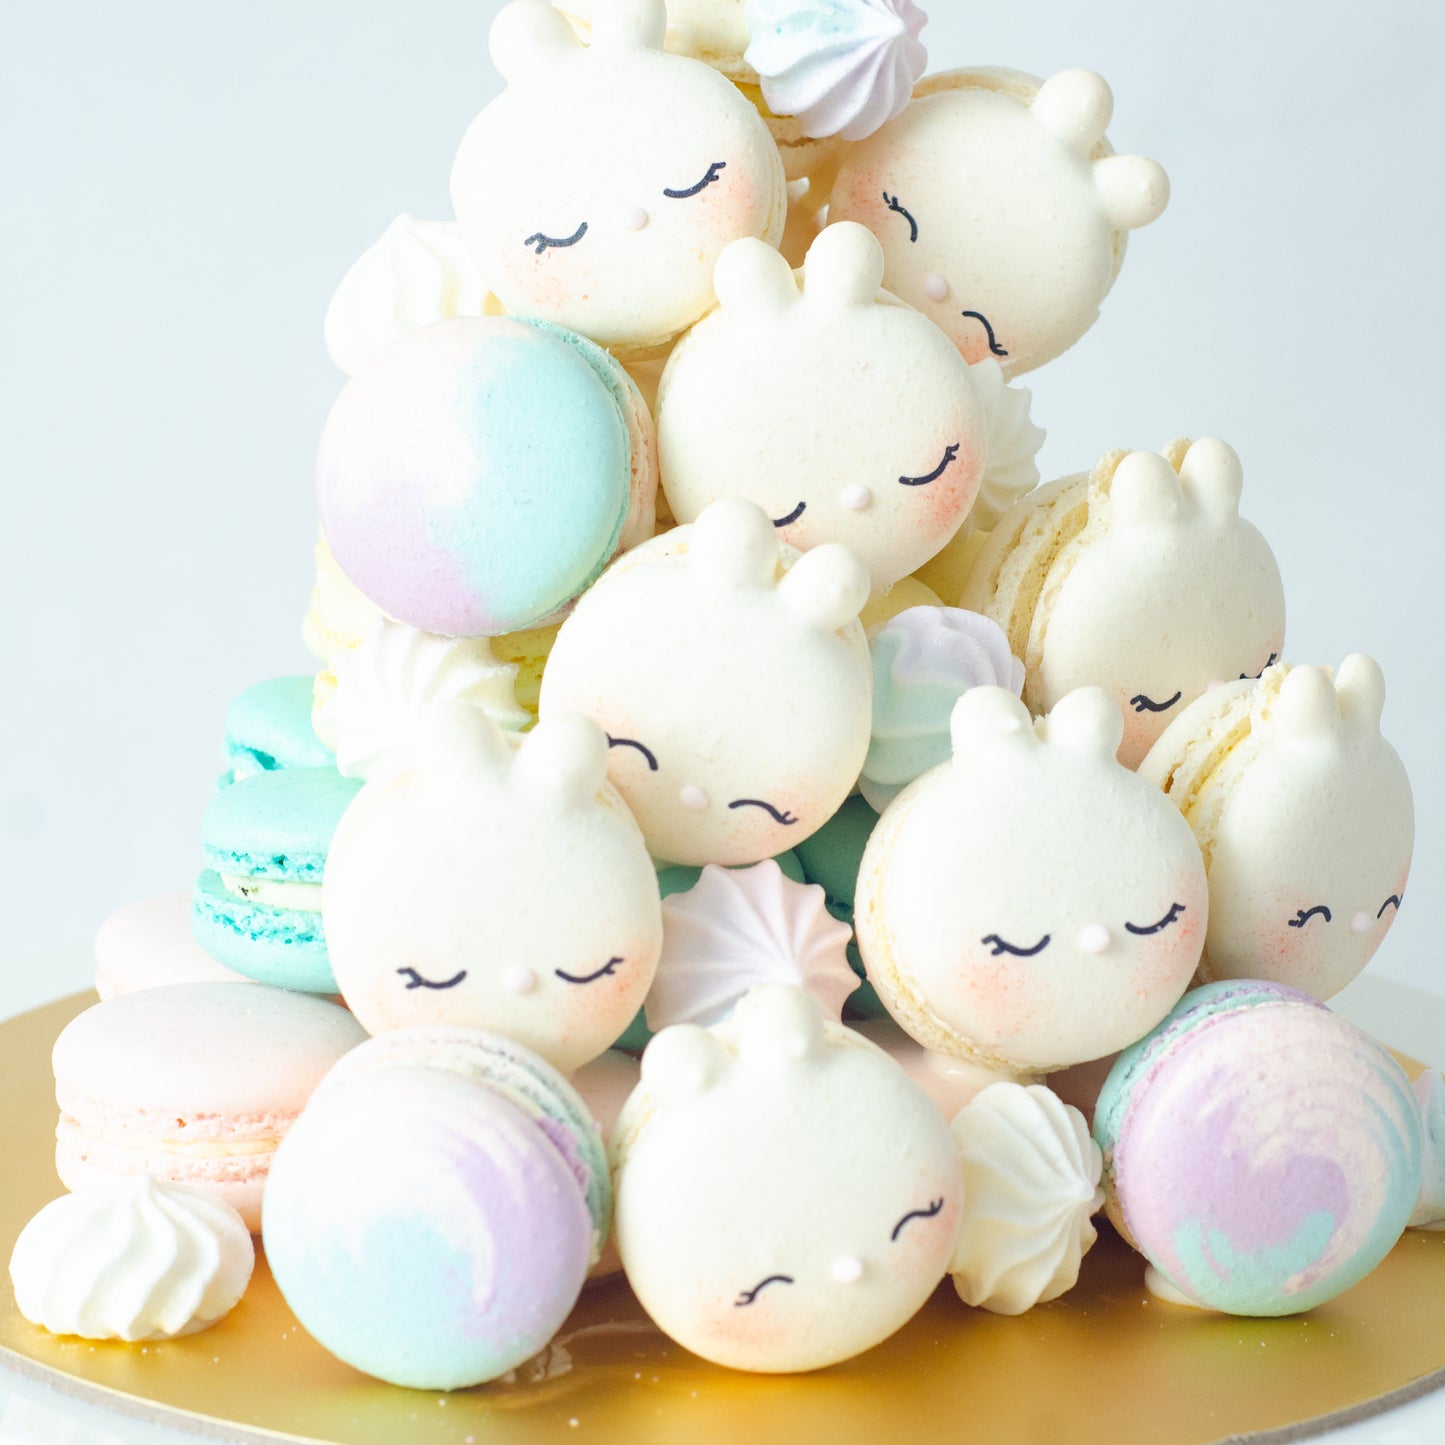 Bunny Macaron Tower |  43pcs Macarons Total in a Tower | $138 Only!